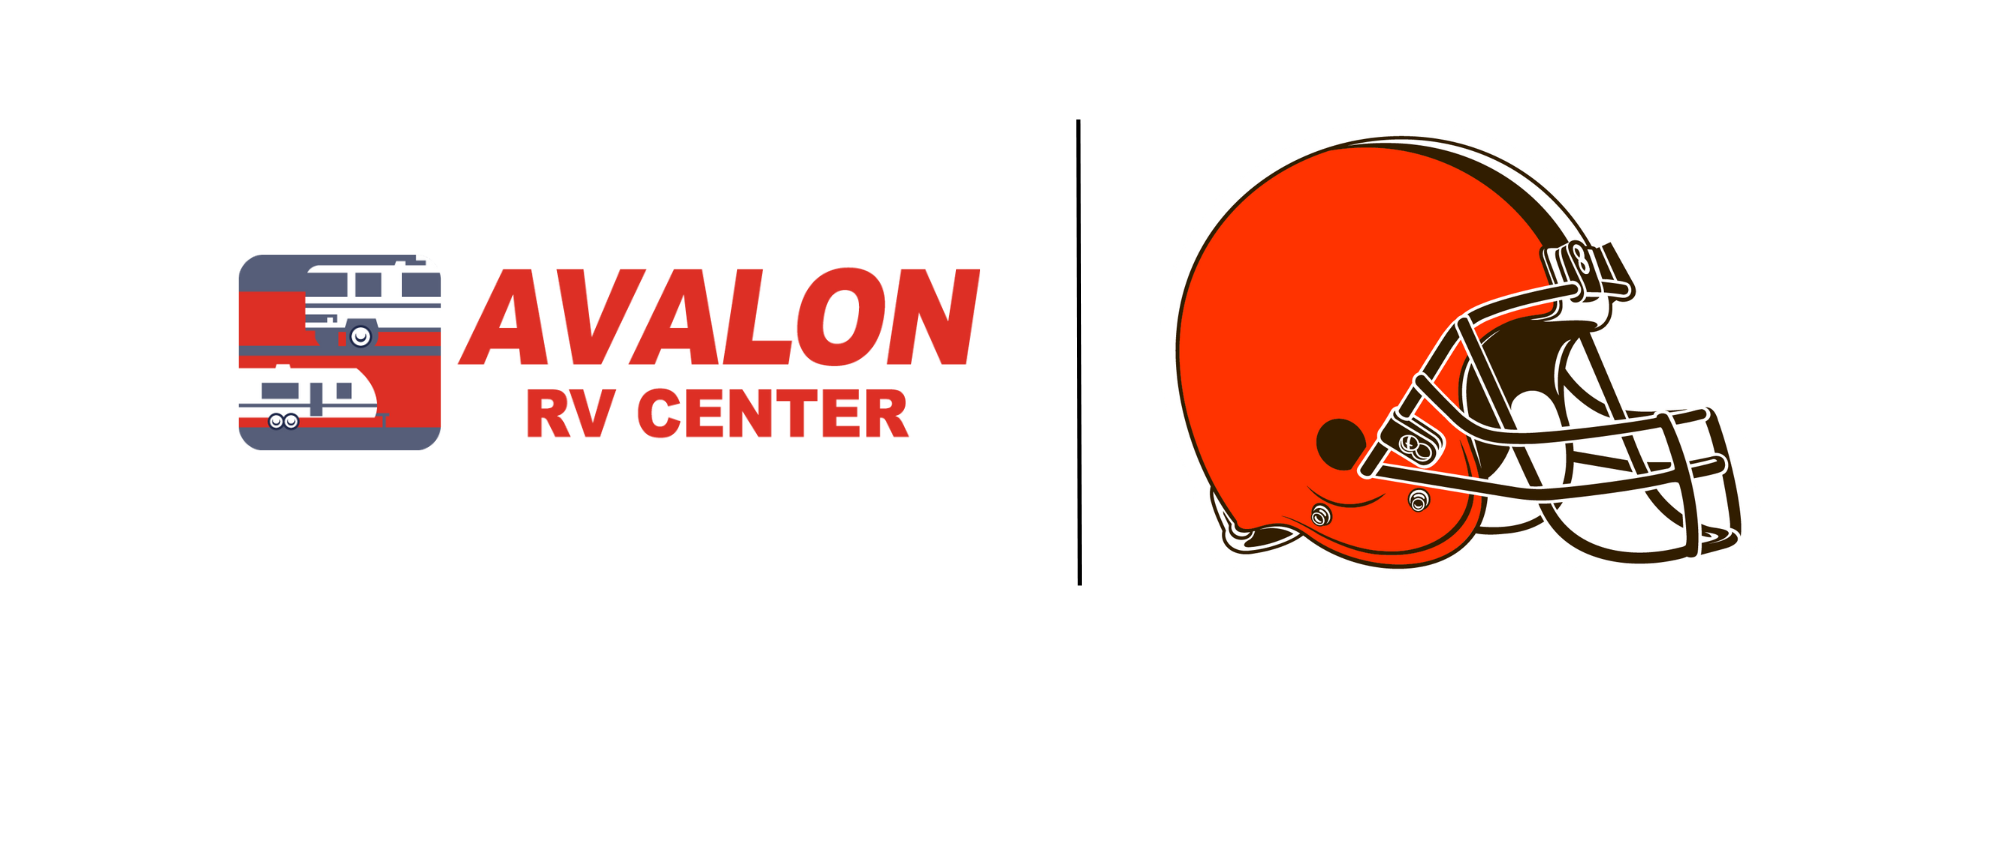 avalon rv center proud partner of the cleveland browns